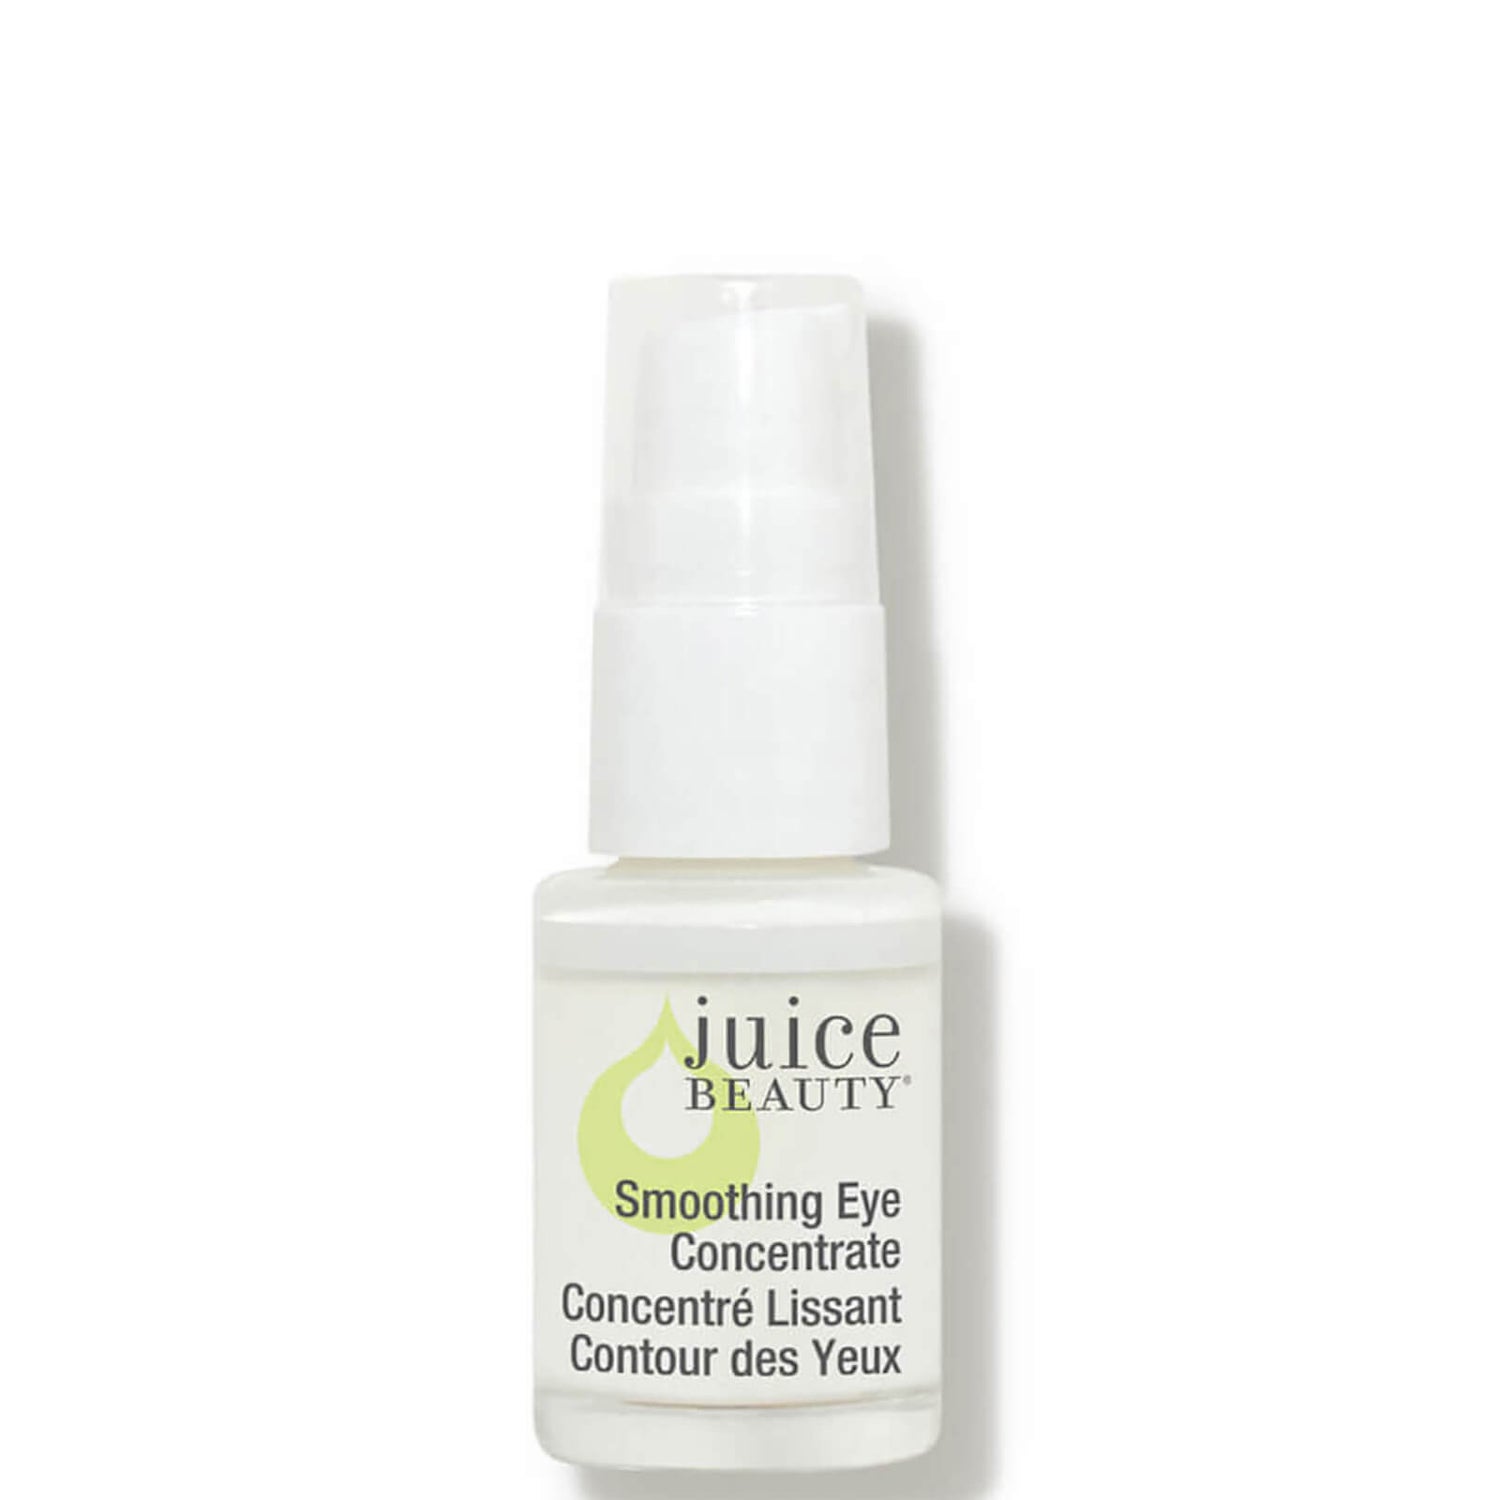 Juice Beauty Smoothing Eye Concentrate (0.5 fl. oz.)